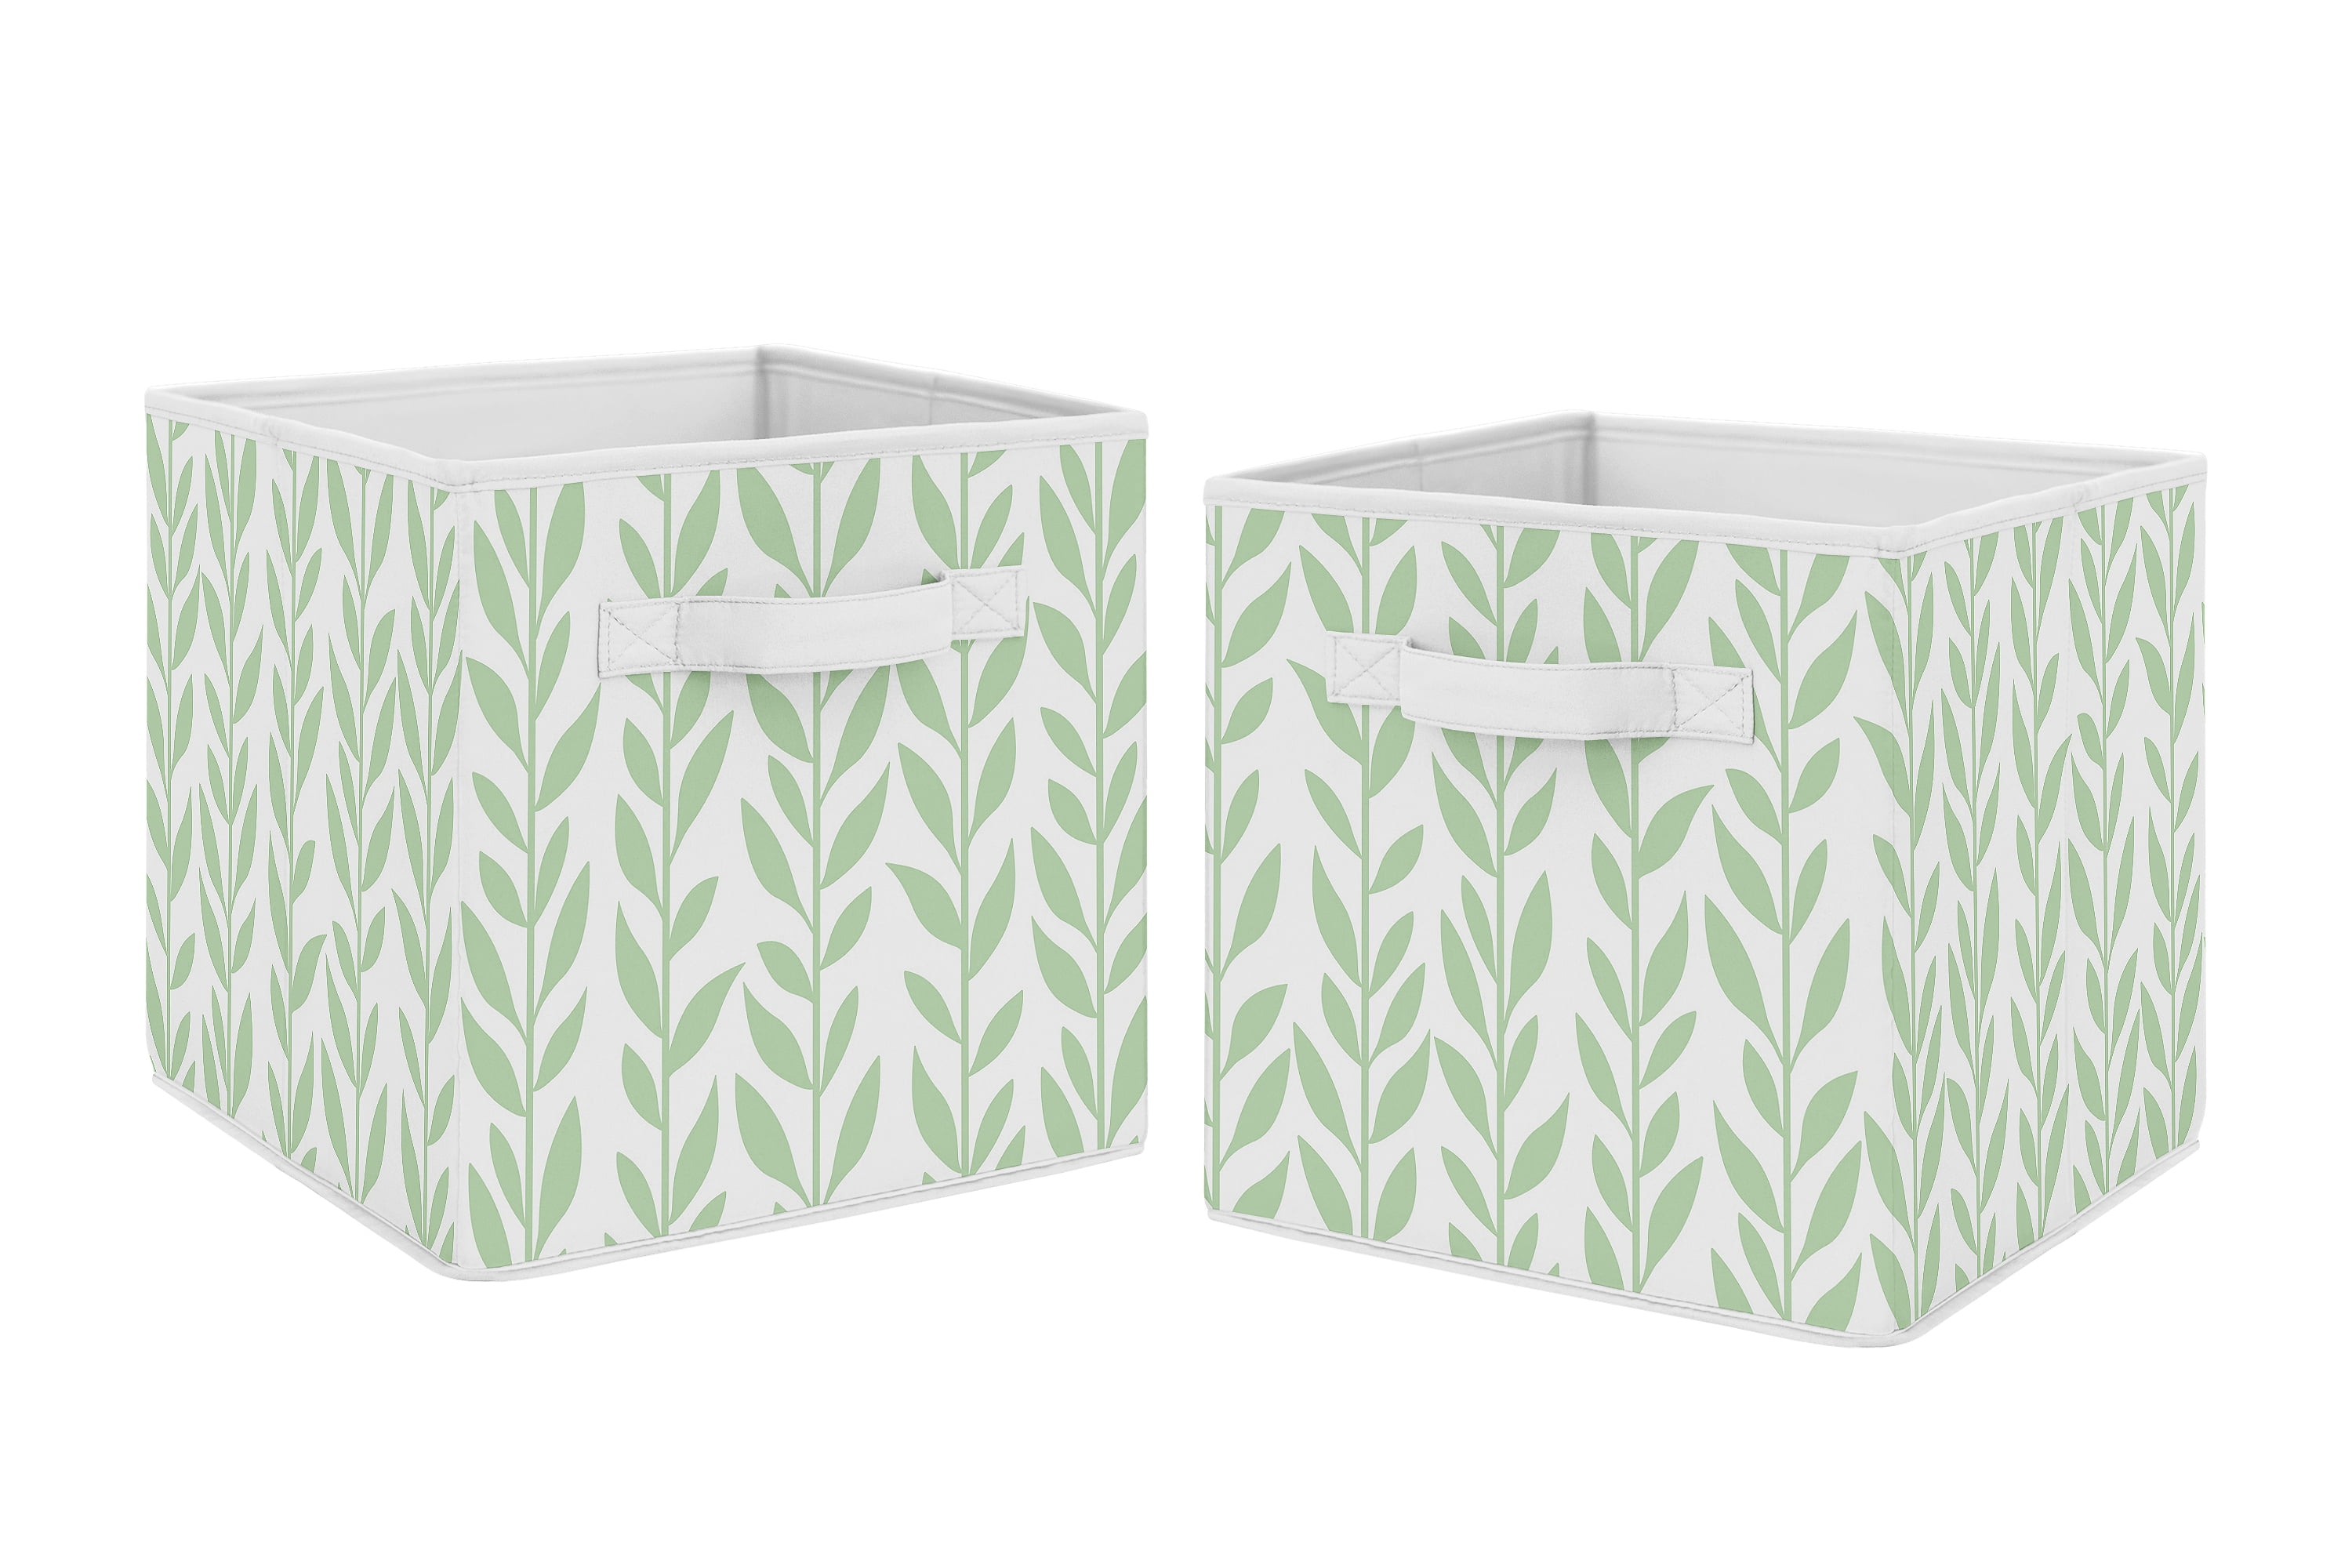 Utensilo Storage Box Fabric M White Top in Beige with Green Flowers